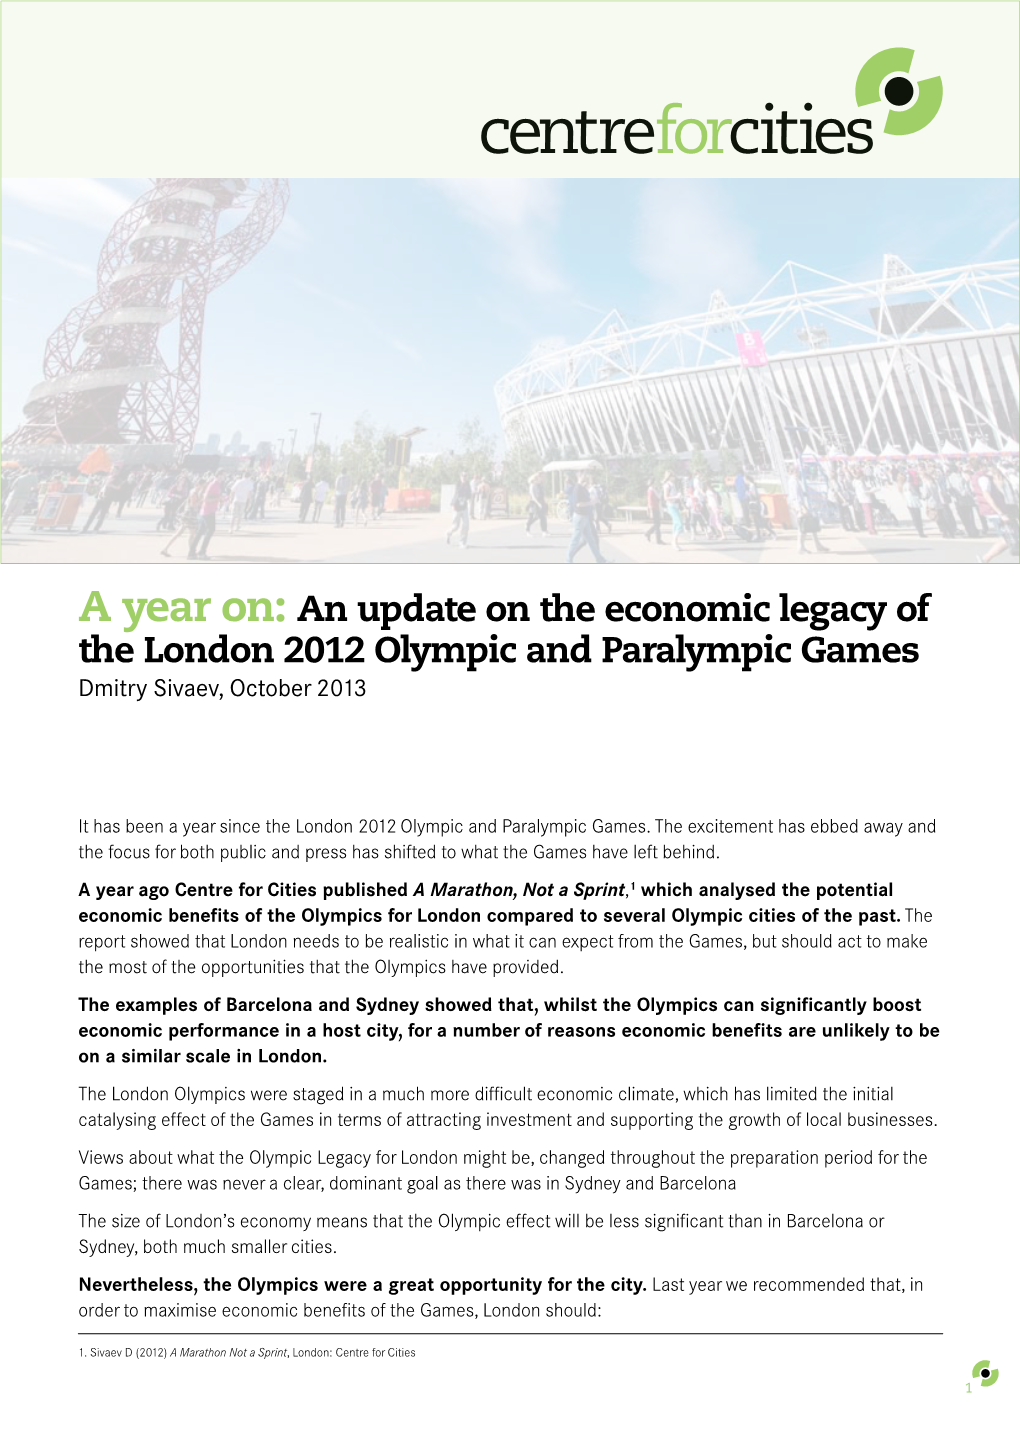 A Year On: an Update on the Economic Legacy of the London 2012 Olympic and Paralympic Games Dmitry Sivaev, October 2013